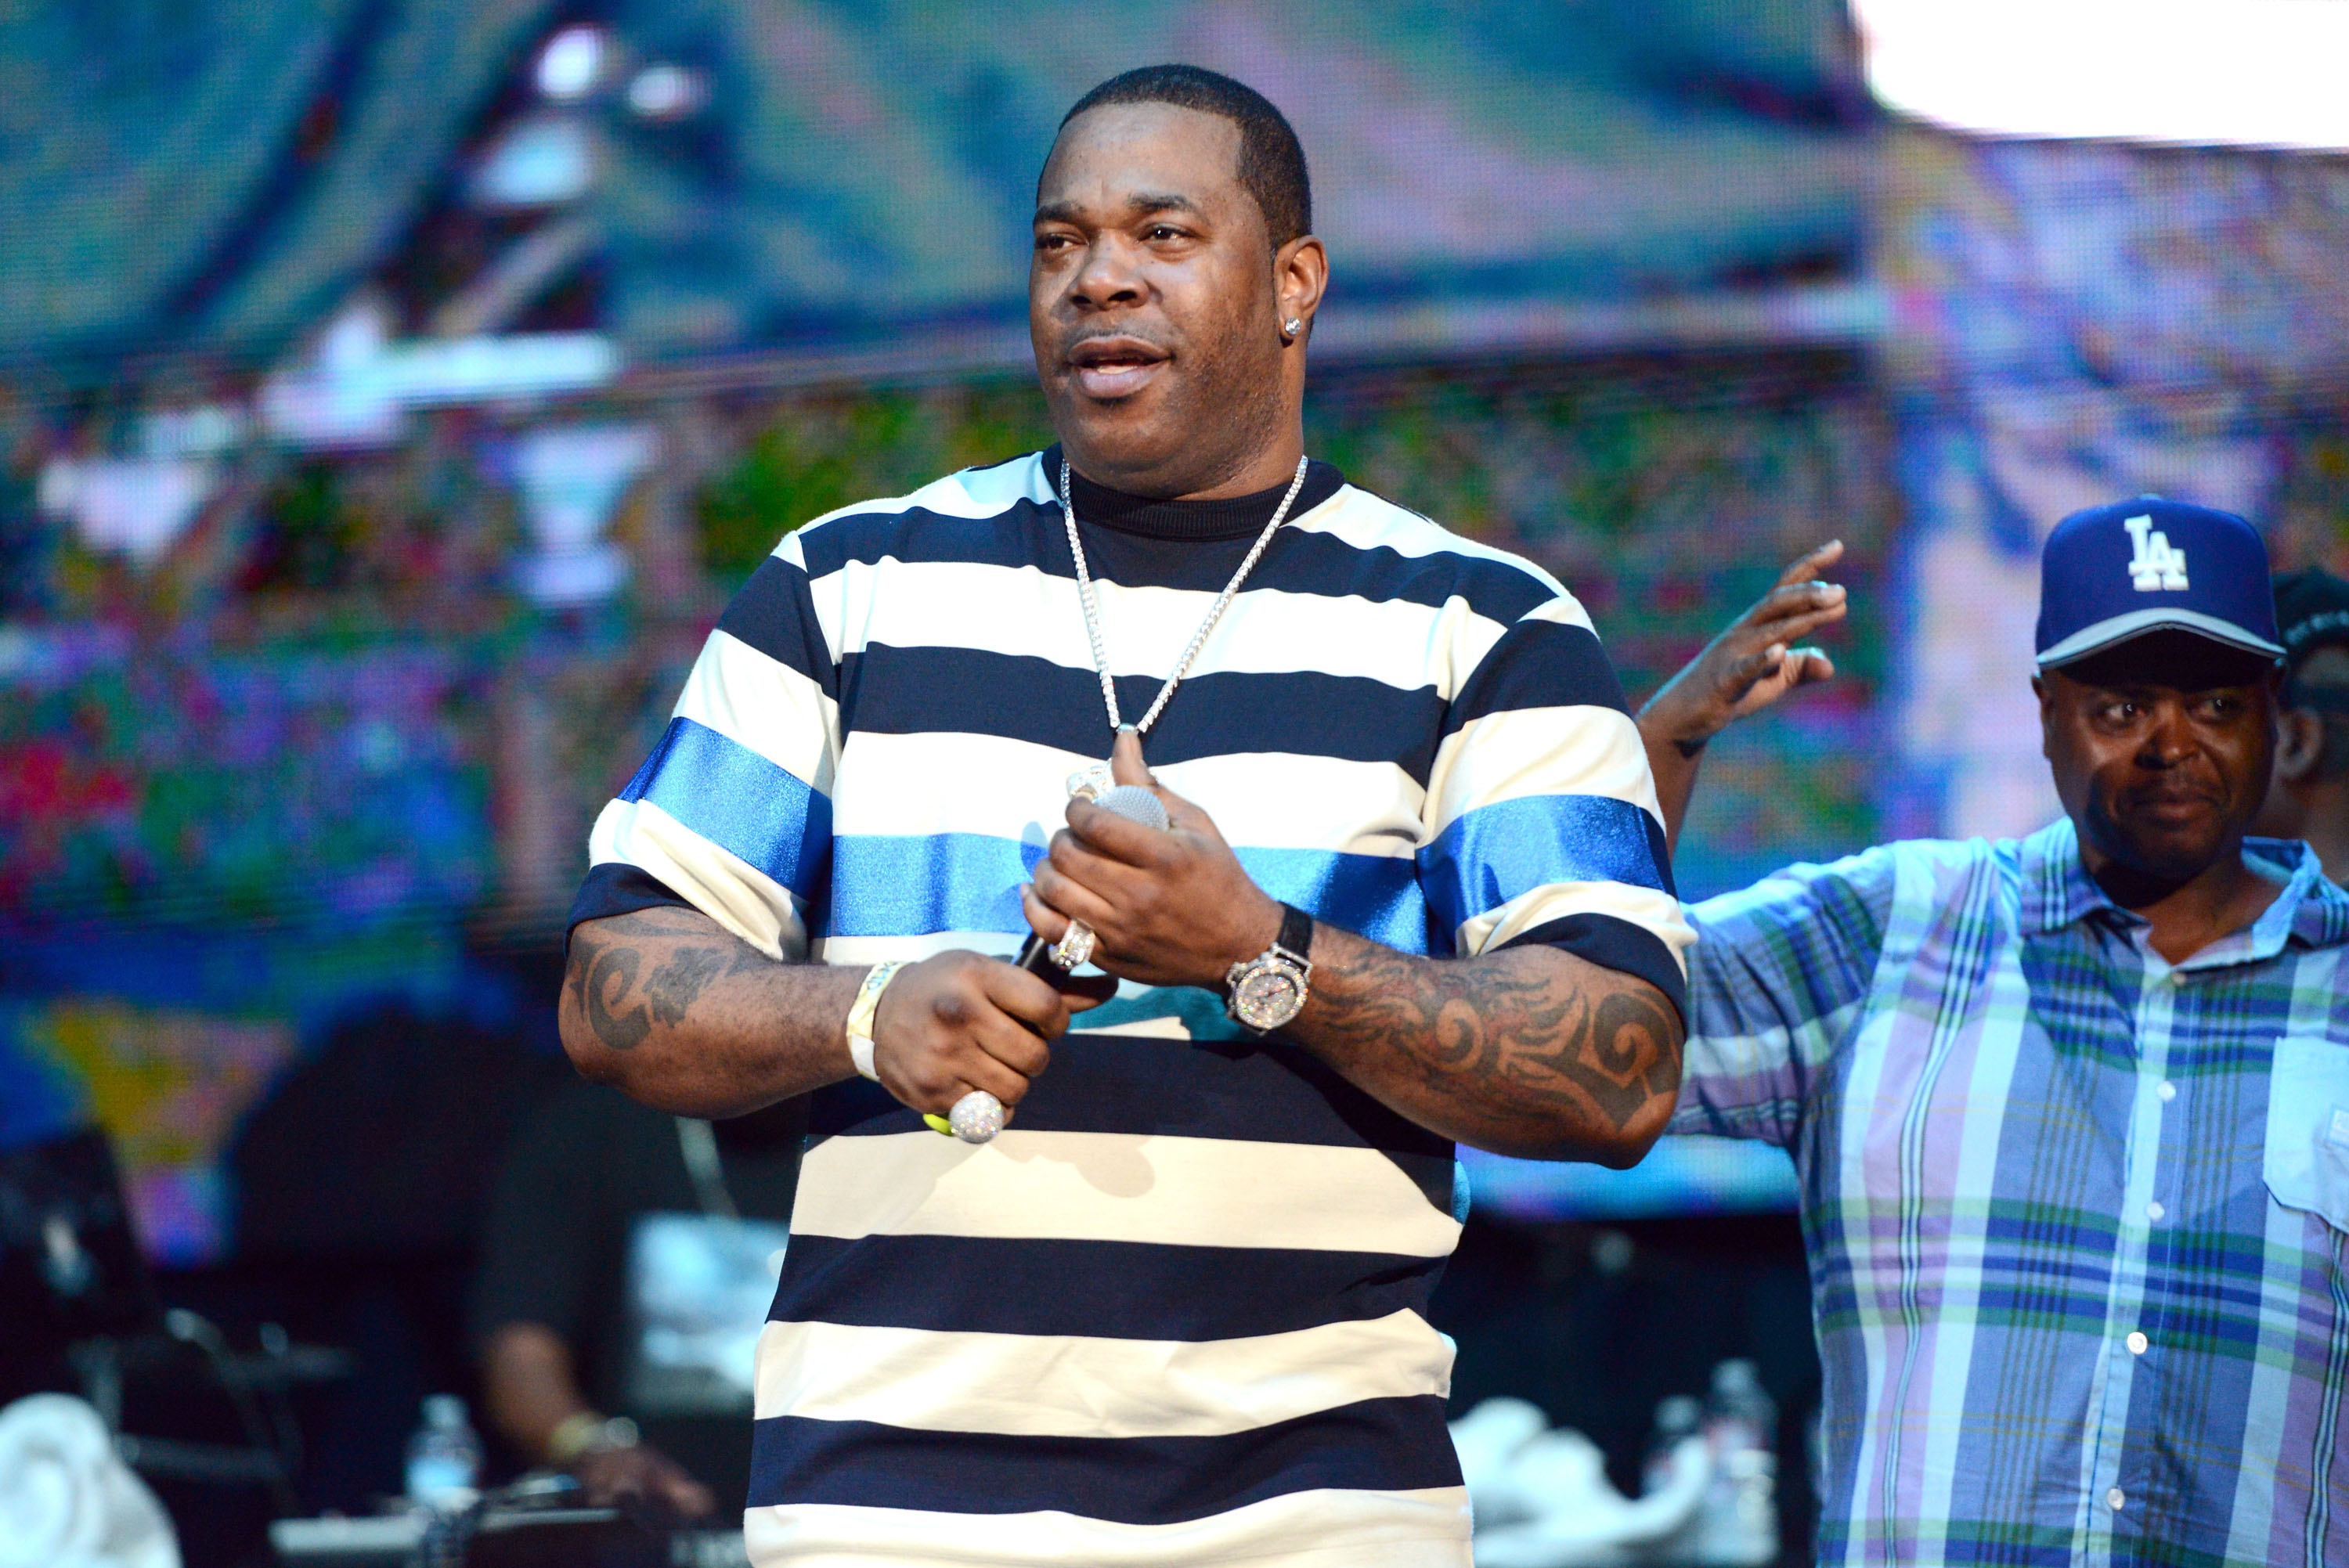 Busta Rhymes performs onstage at Irvine Meadows Amphitheatre on July 18 in Irvine, Calif.. (Scott Dudelson—Getty Images)